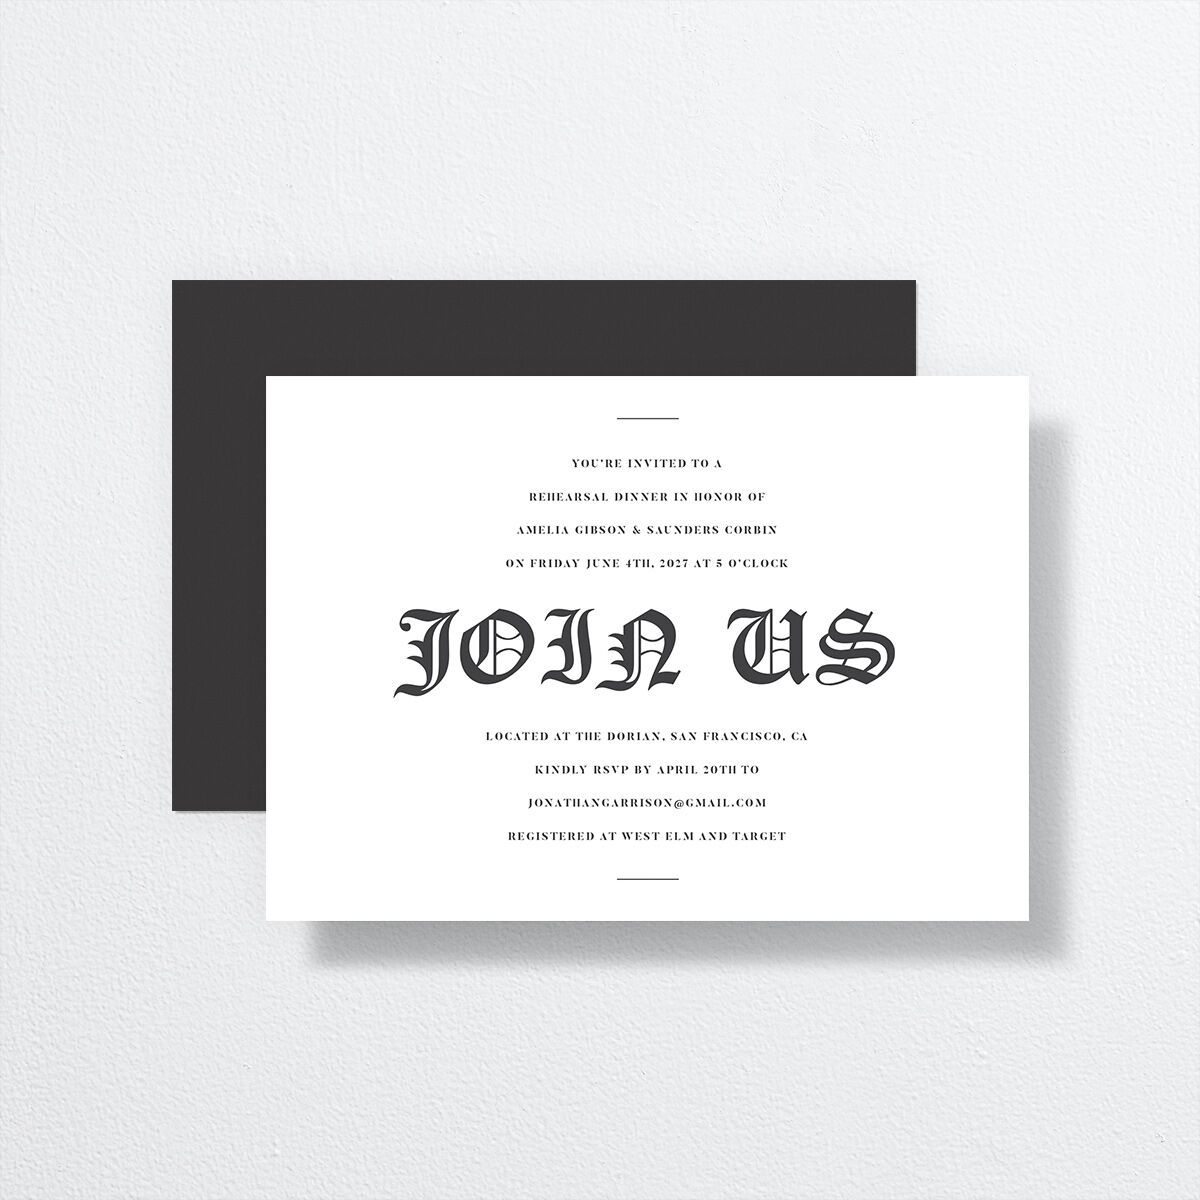 I Do Rehearsal Dinner Invitations by Vera Wang front-and-back